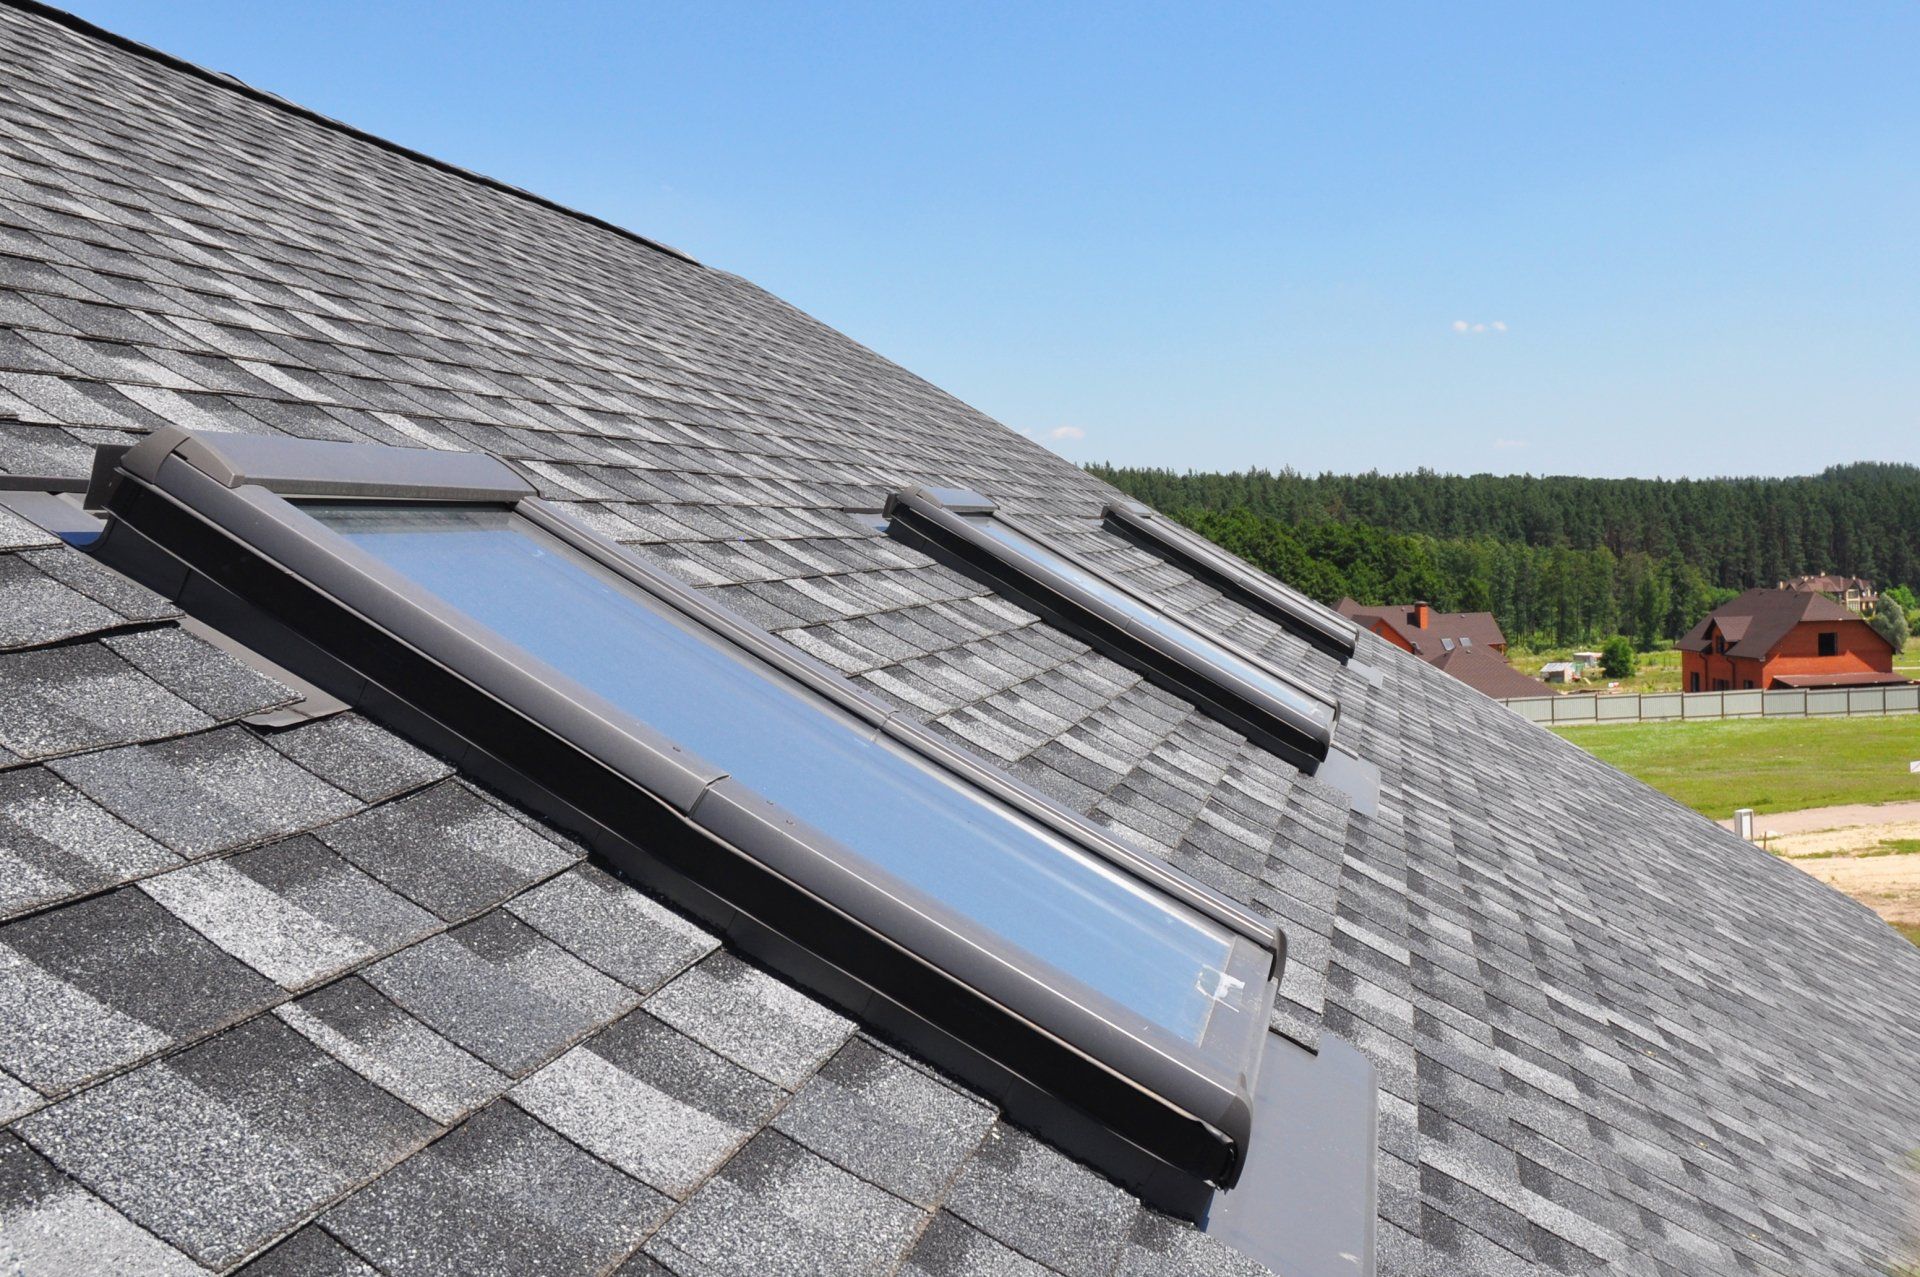 Asphalt Shingles House Roofing Construction with Attic Roof windows